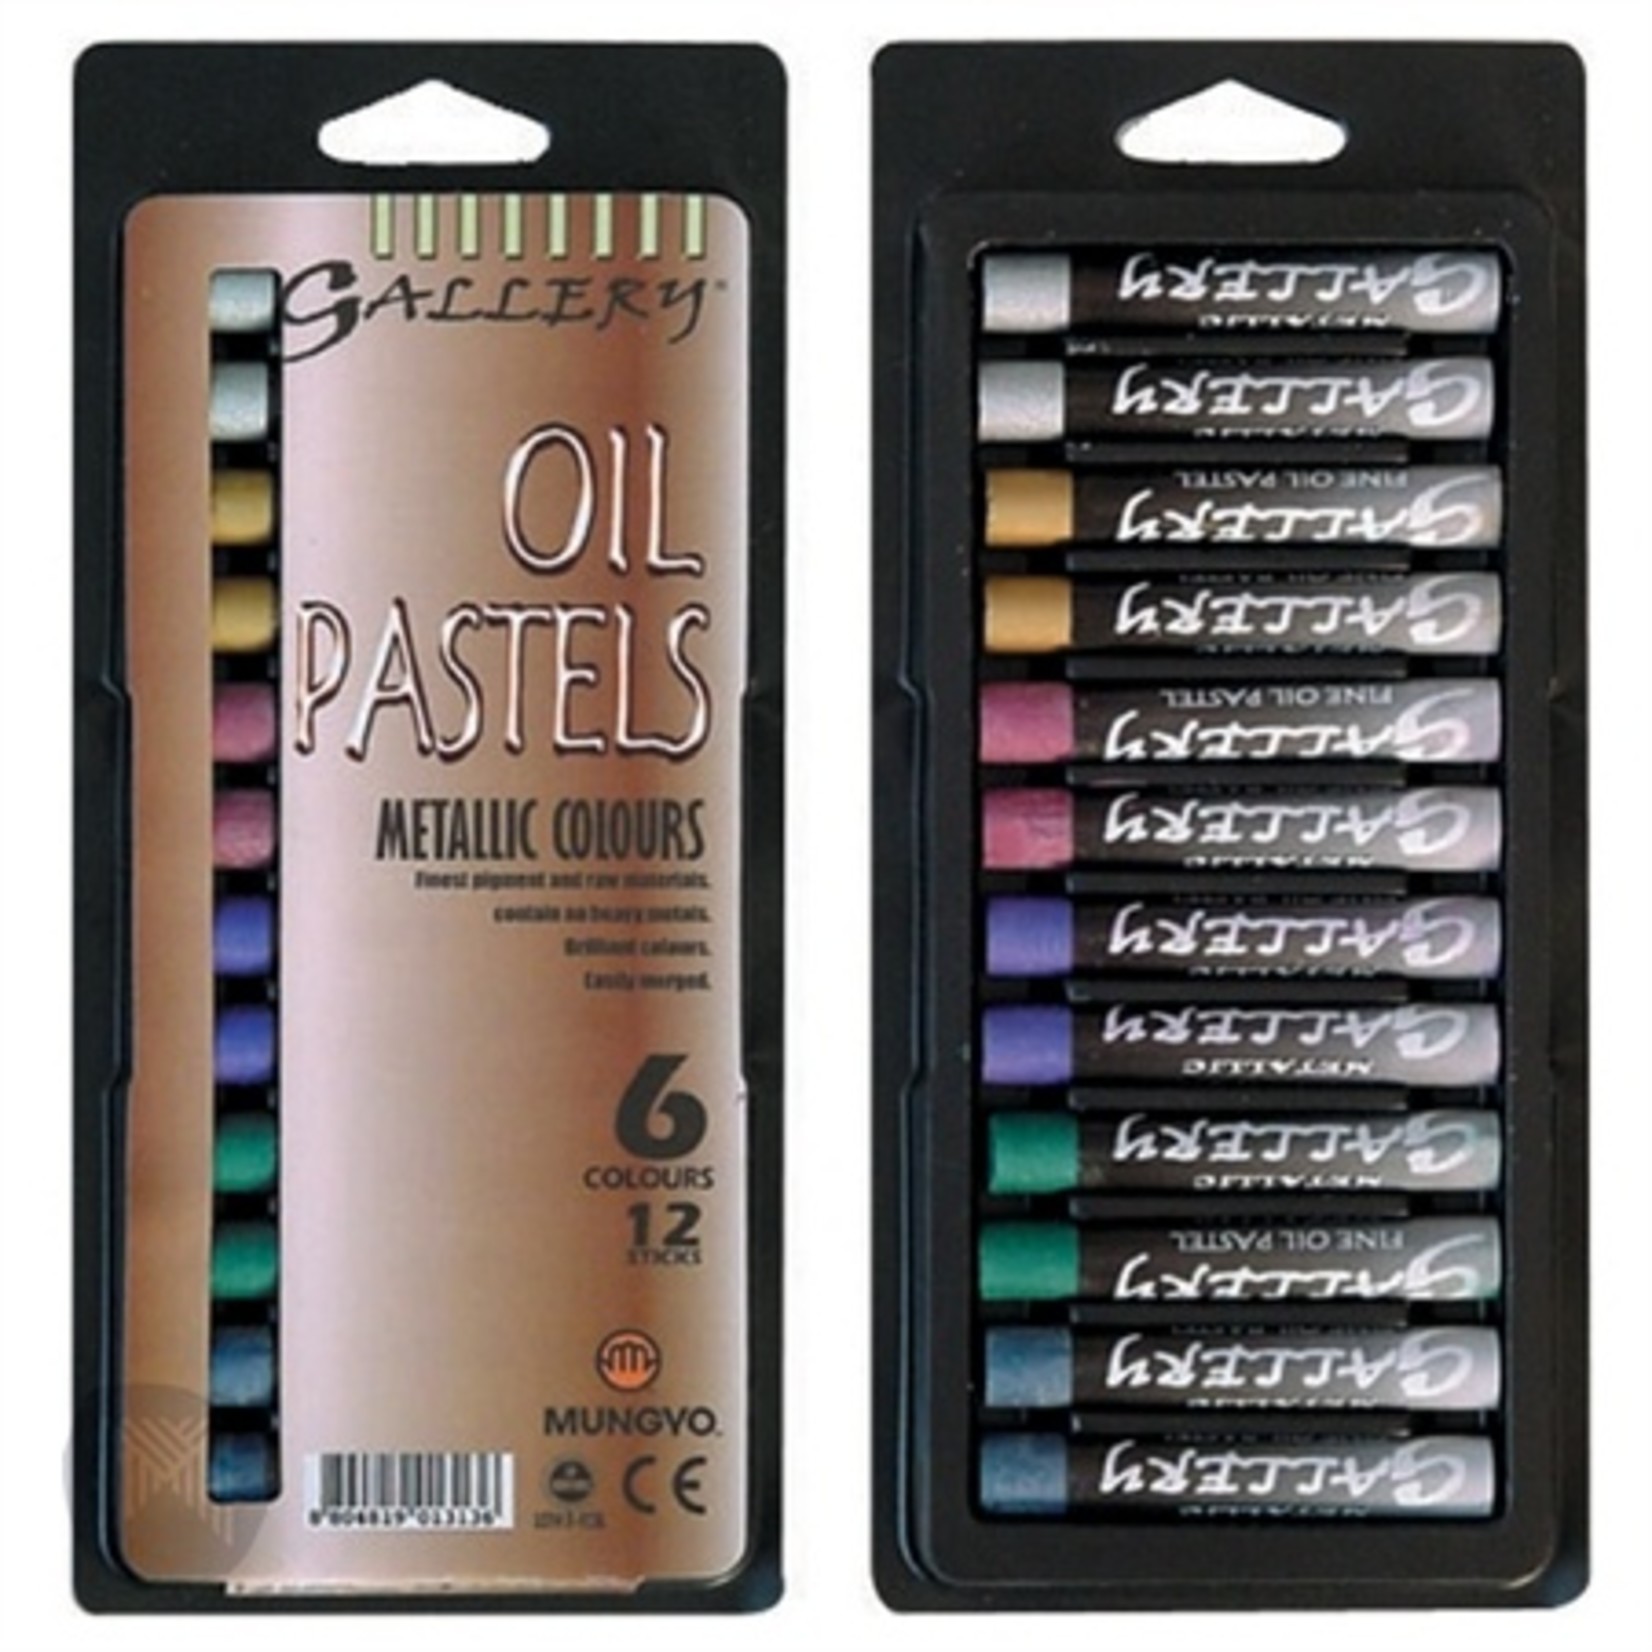 Mungyo® Oil Pastels - Metallic Colours - Pack of 12